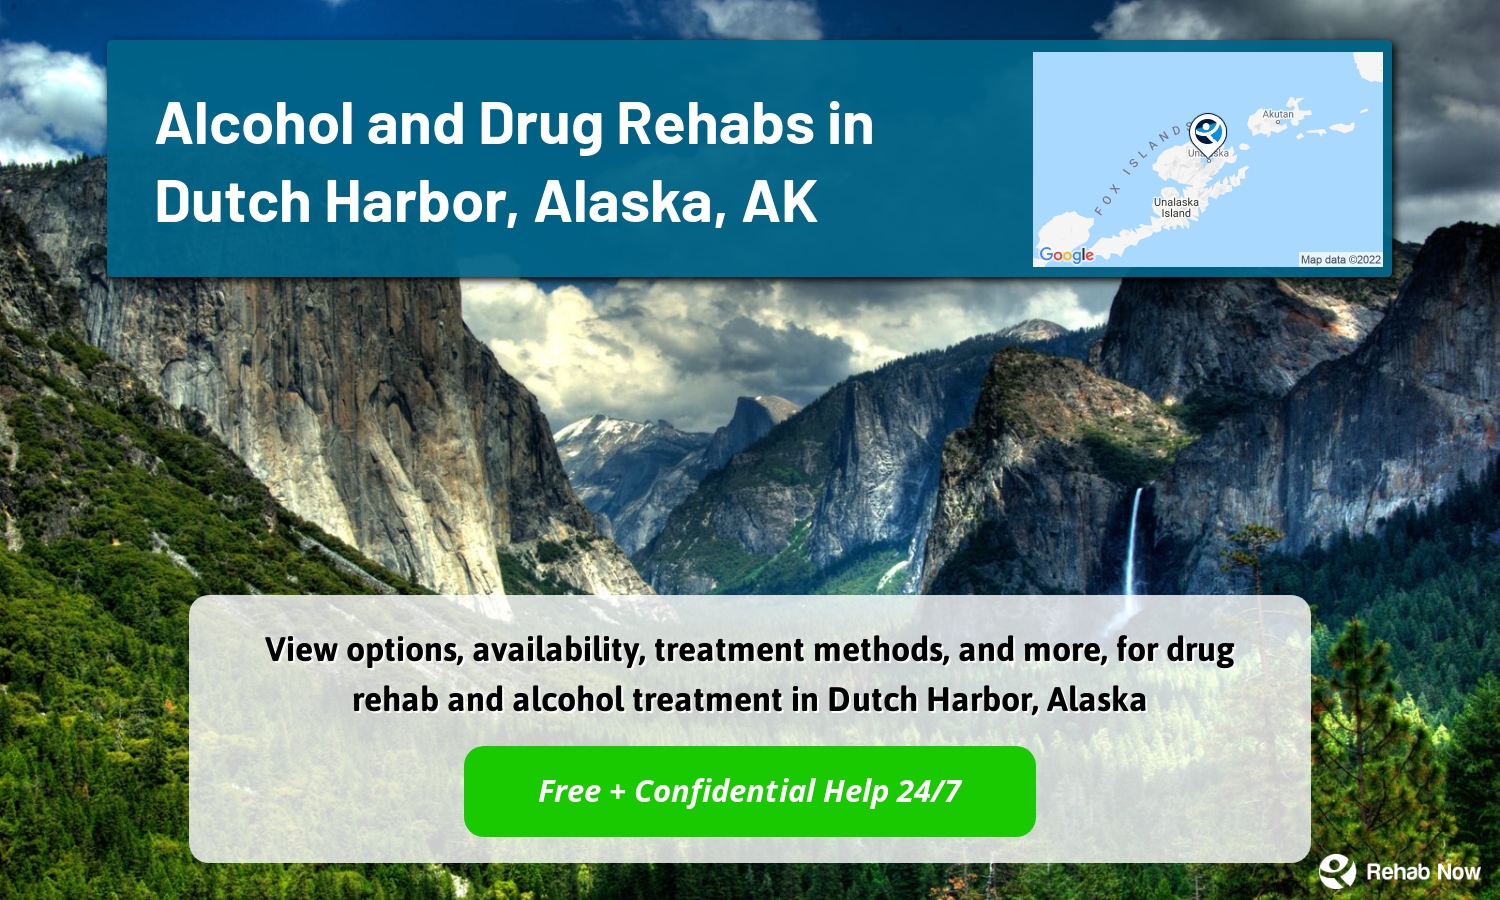 View options, availability, treatment methods, and more, for drug rehab and alcohol treatment in Dutch Harbor, Alaska